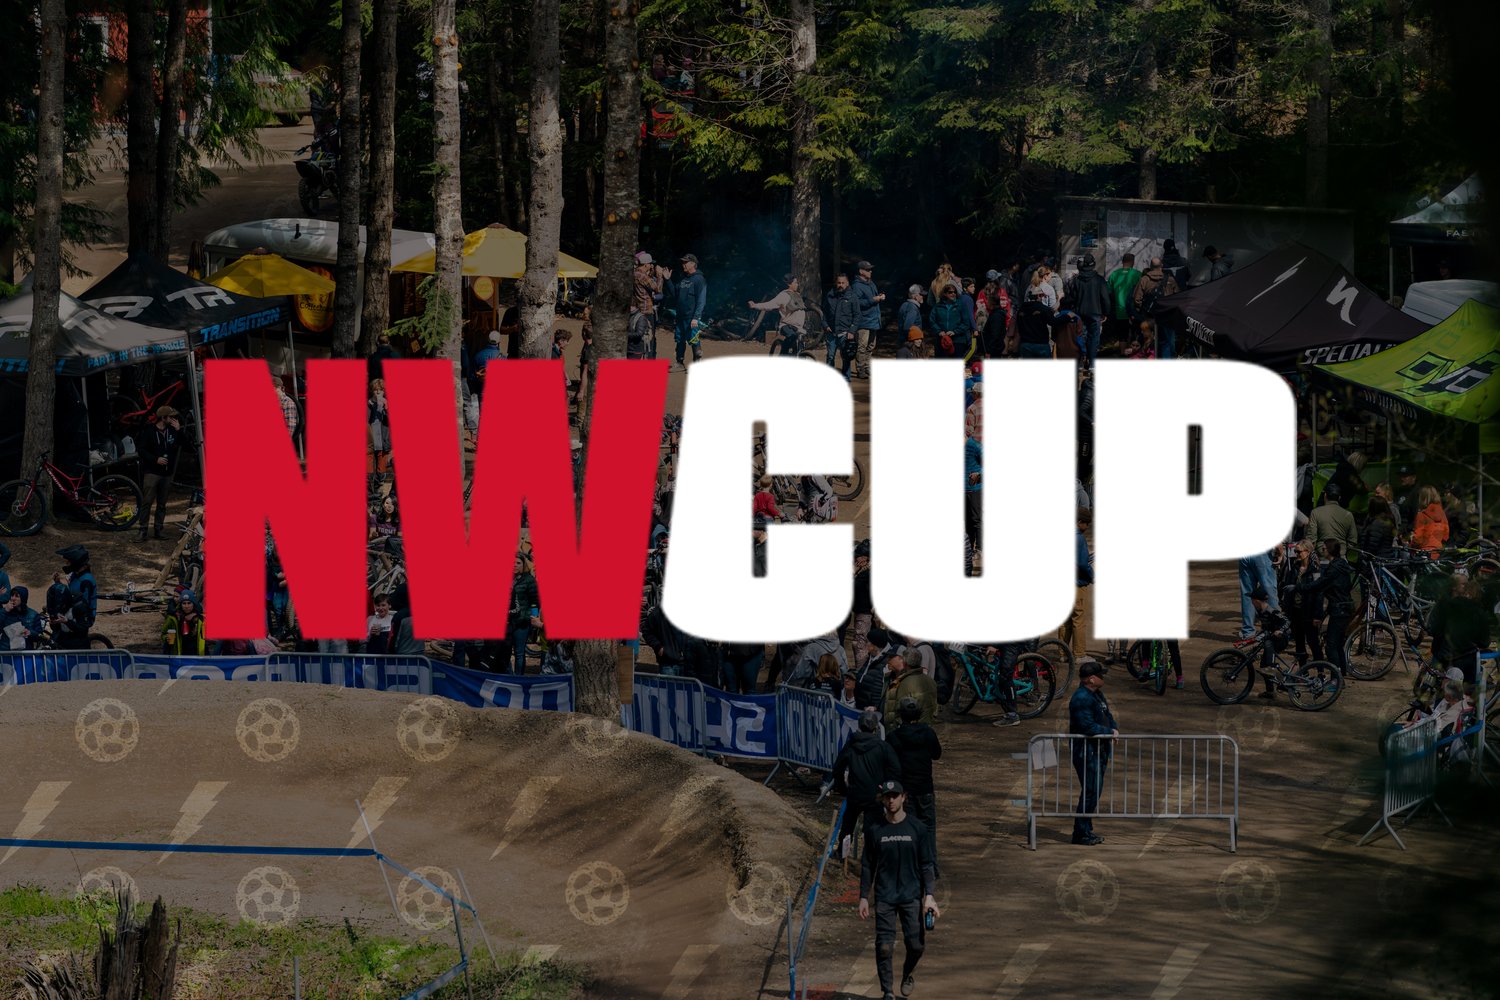 www.nwcup.com